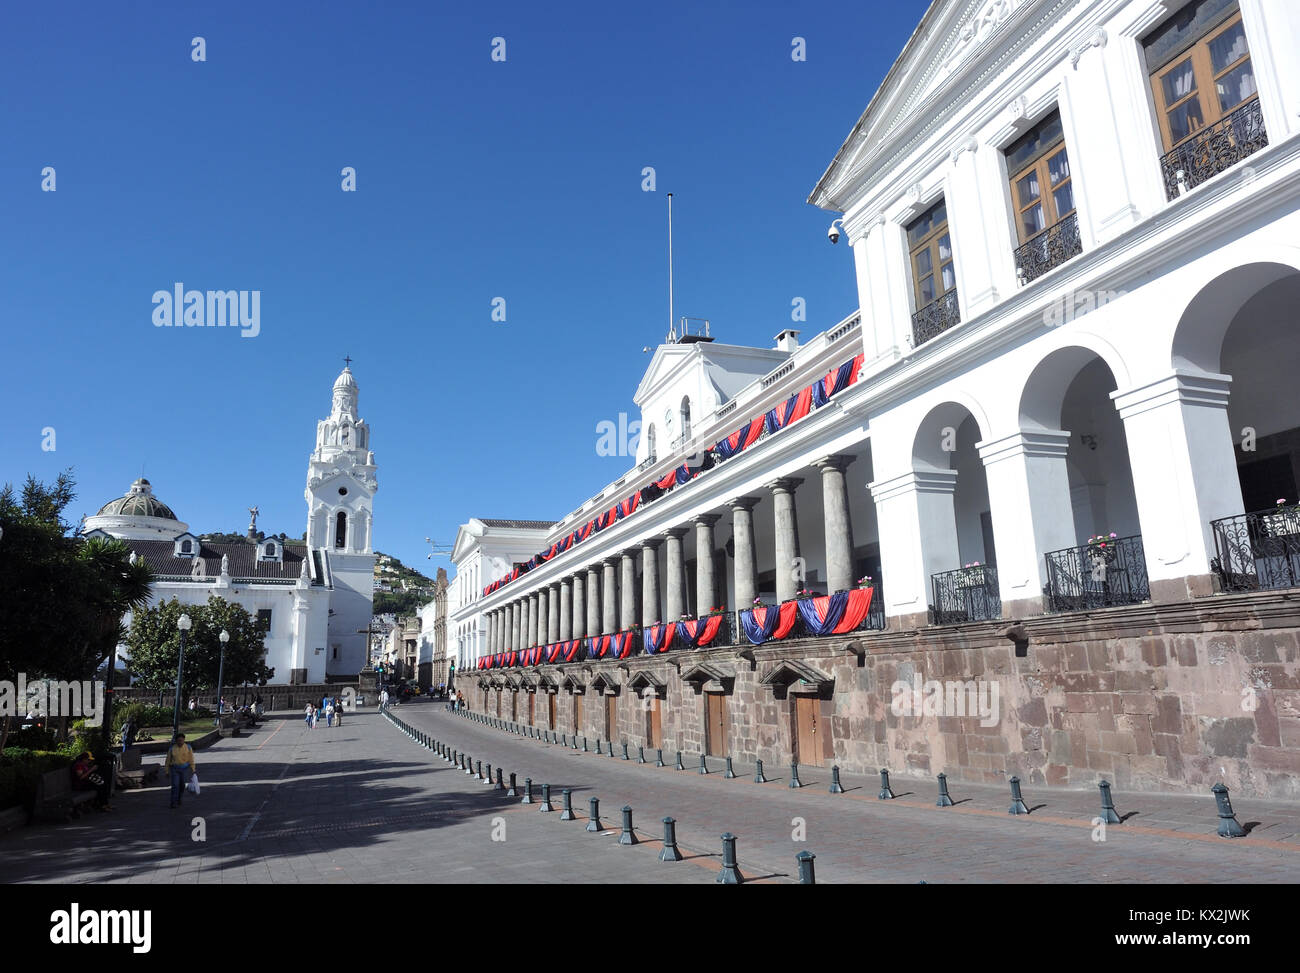 Carondelet Palace, Palacio de Carondelet, which houses government offices and presidential quarters and Quito Cathedral, Catedral Metropolitana de Qui Stock Photo